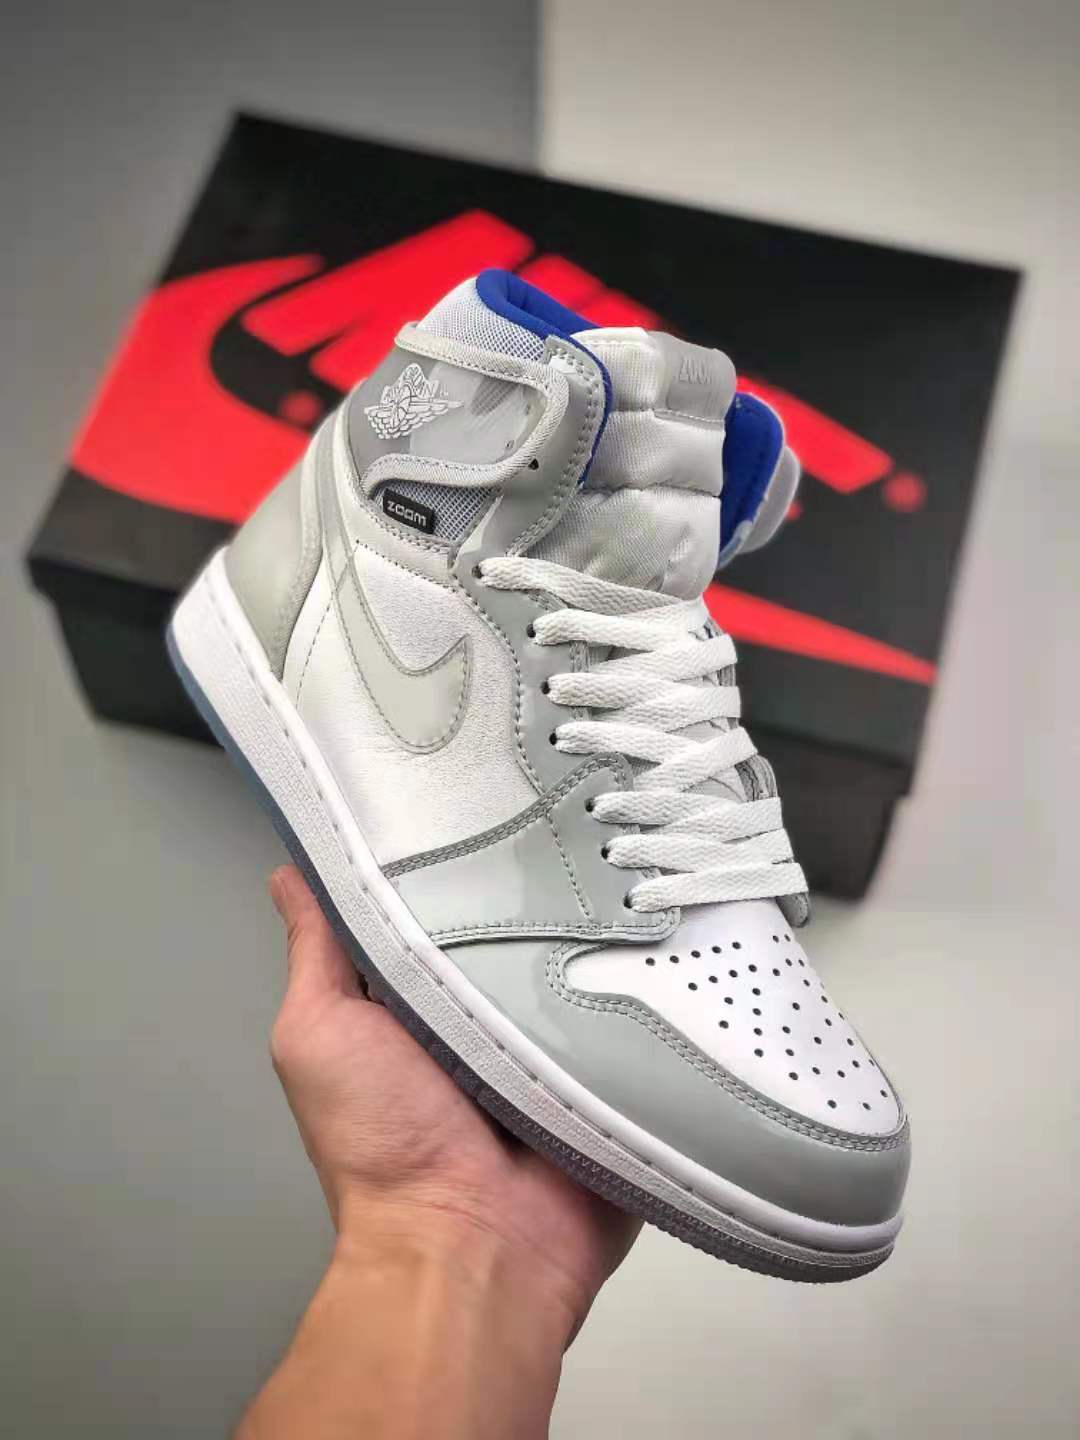 Air Jordan 1 High Zoom 'Racer Blue' CK6637-104 - Exclusive Sneaker with Zoom Technology!